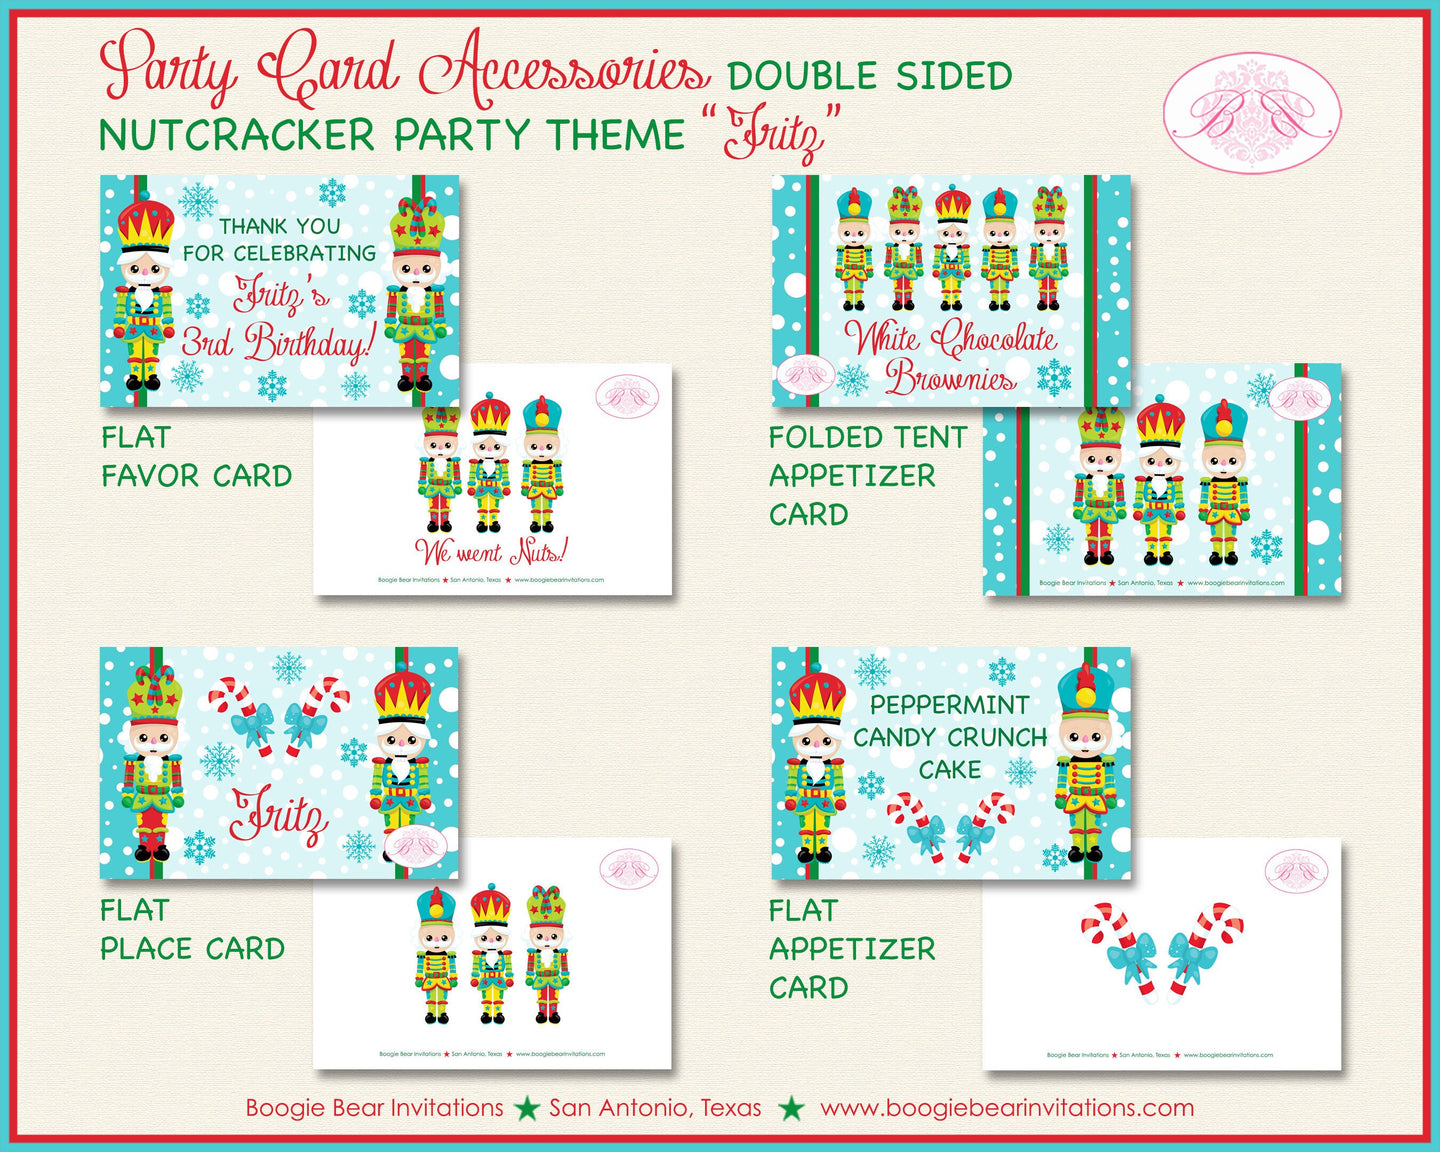 Nutcracker Birthday Party Favor Card Appetizer Food Place Sign Label Winter Christmas Boy Girl Ballet Boogie Bear Invitations Fritz Theme